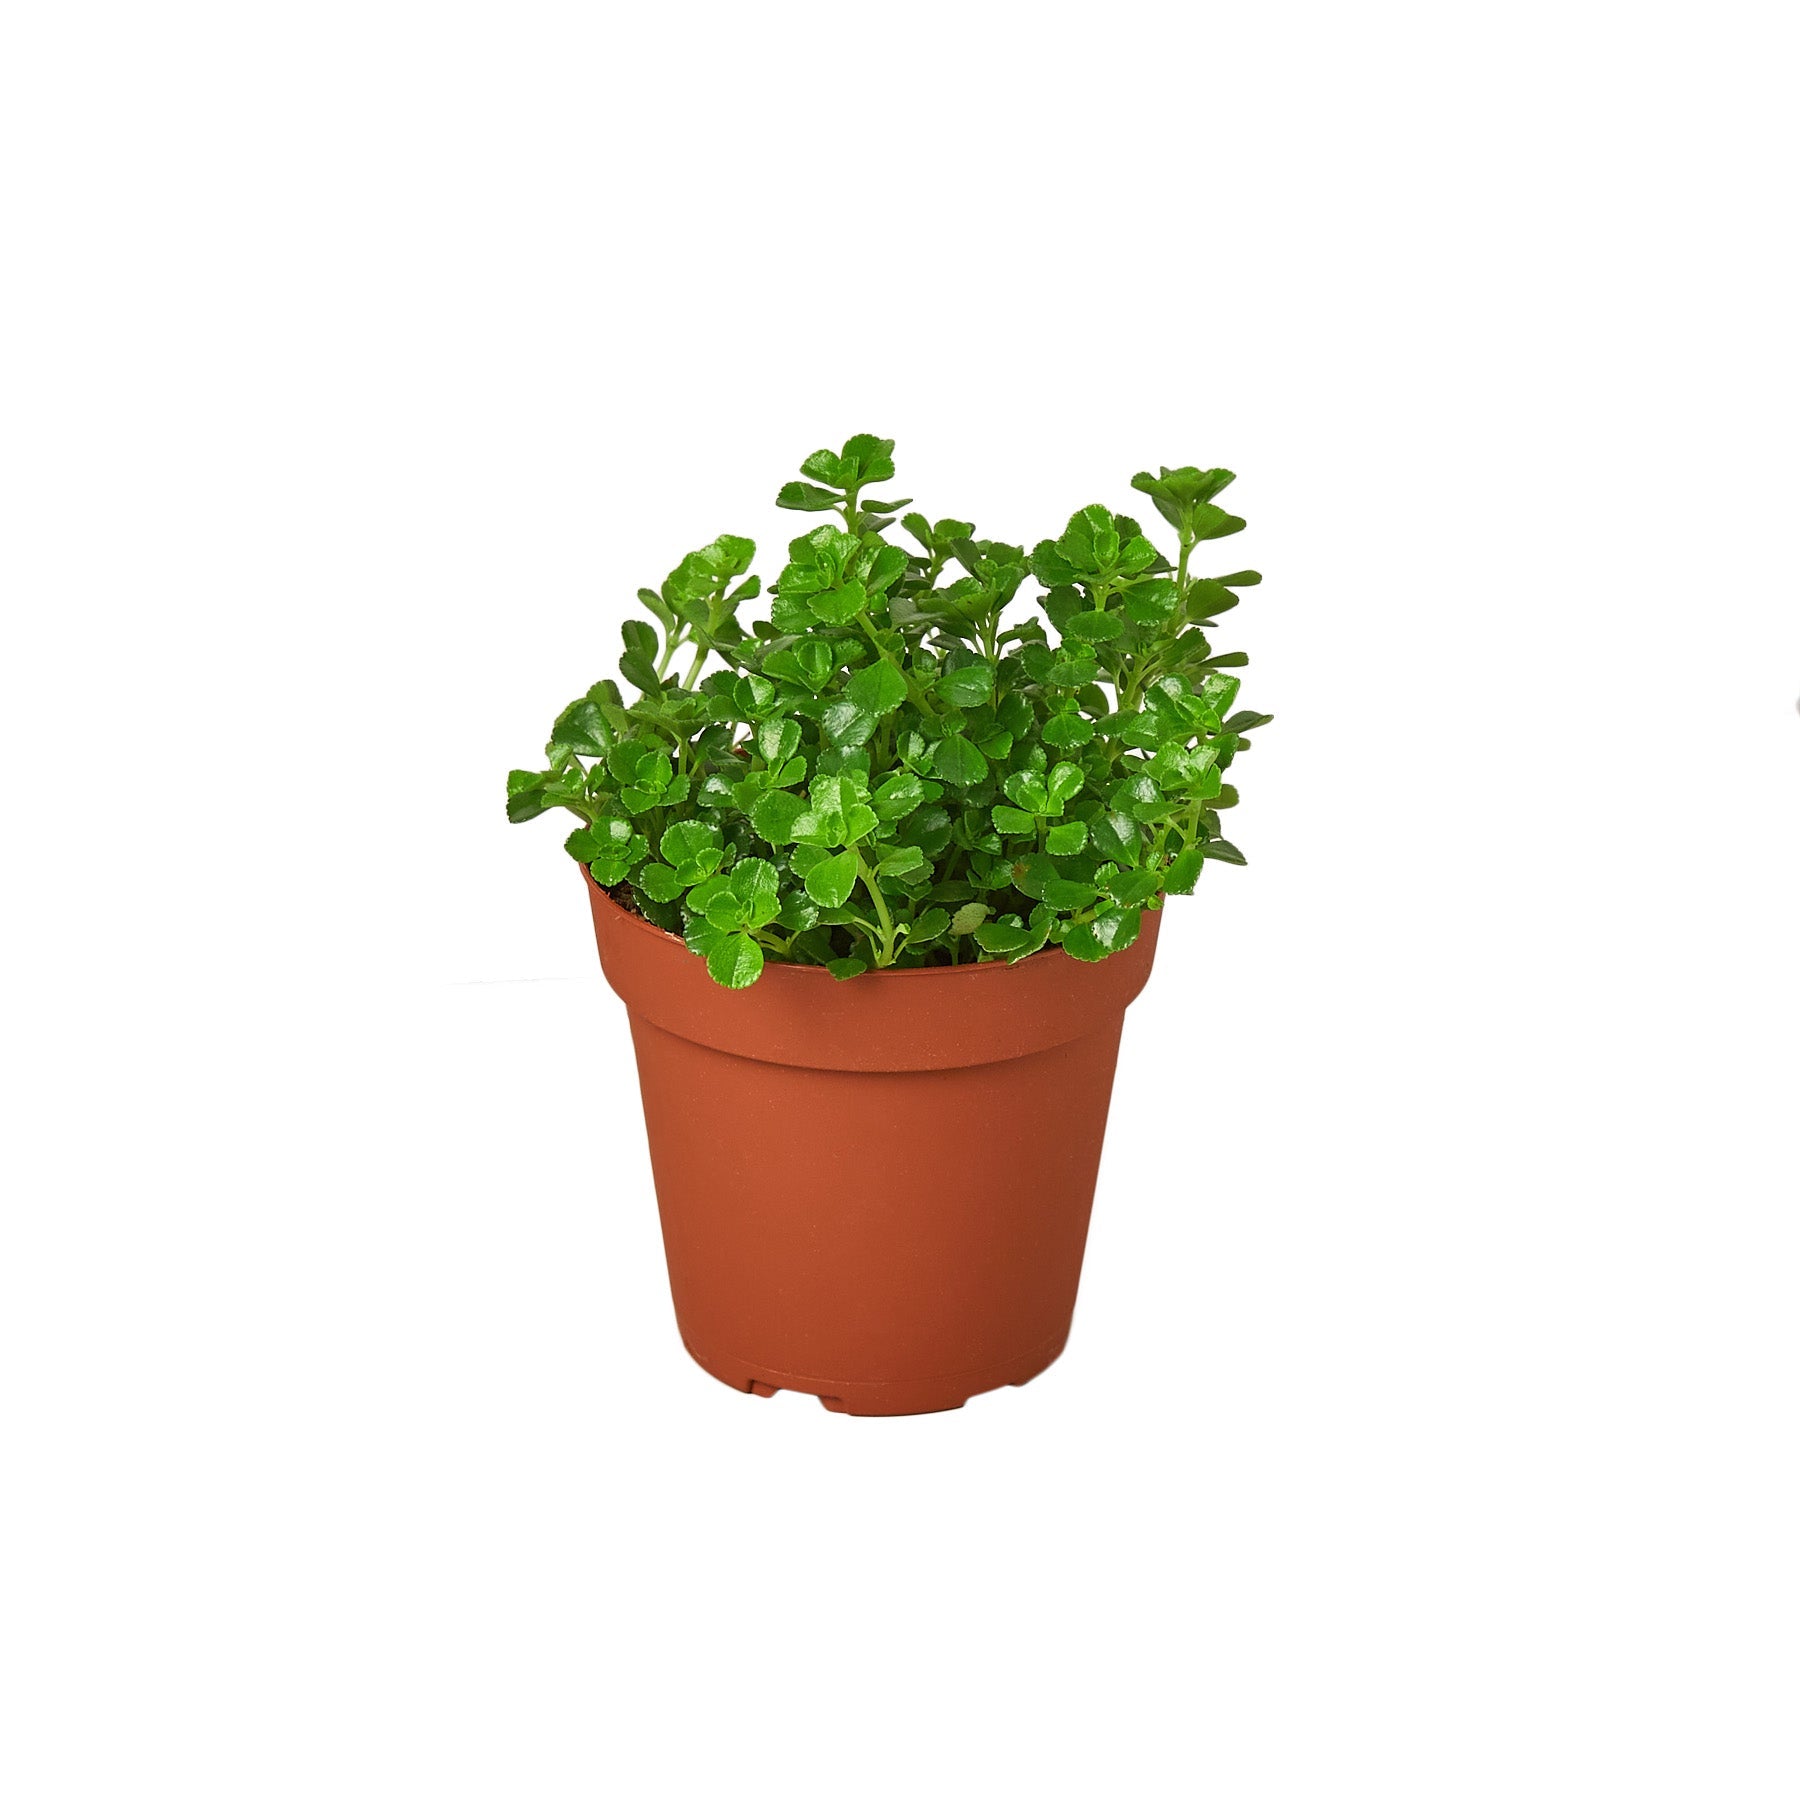 A small plant in a pot on a white background available at a nearby garden center.